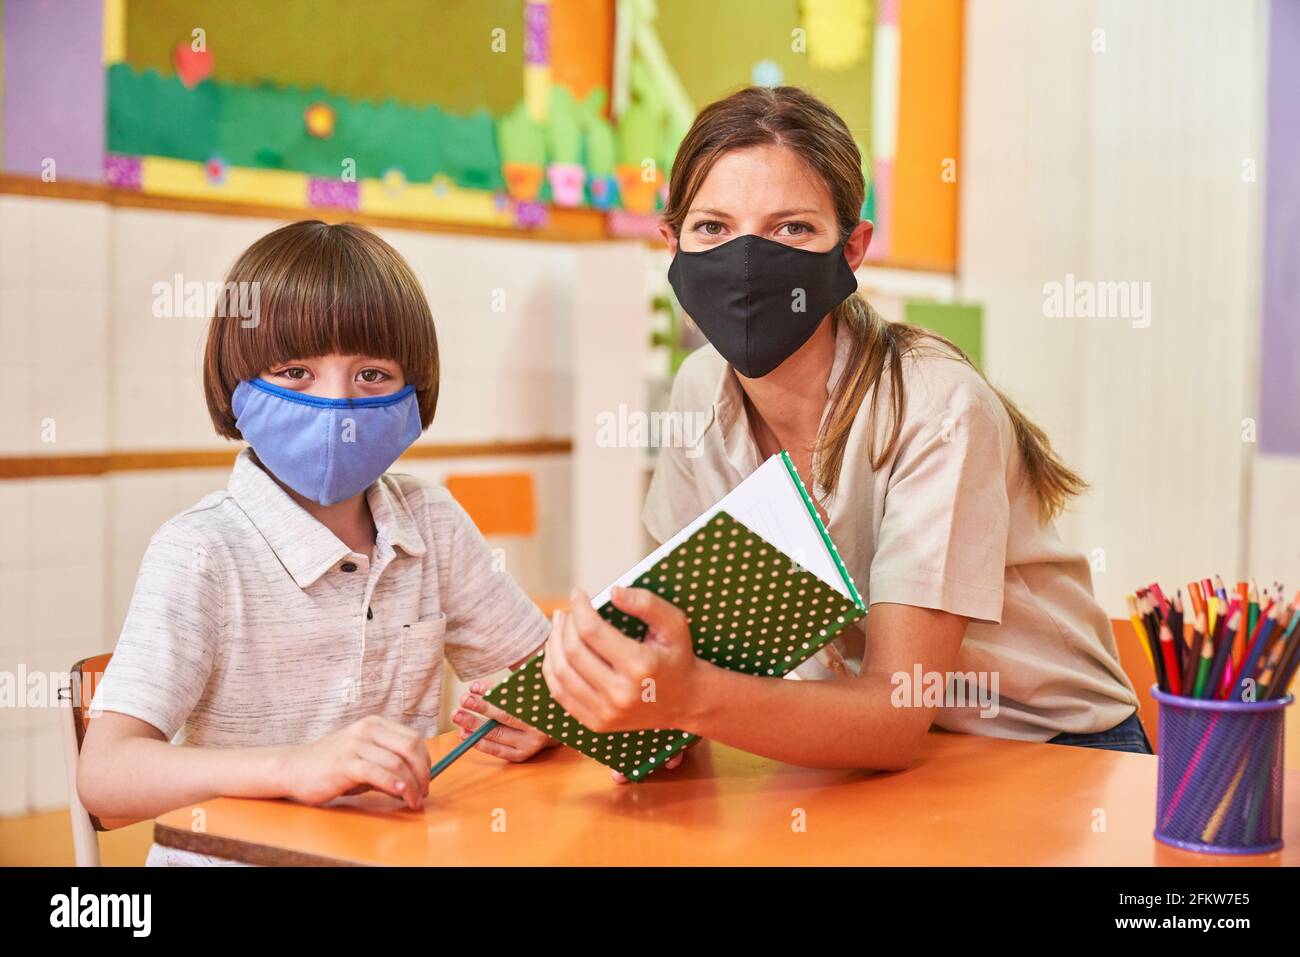 Teacher helps child with mask because of Covid-19 at school with homework Stock Photo